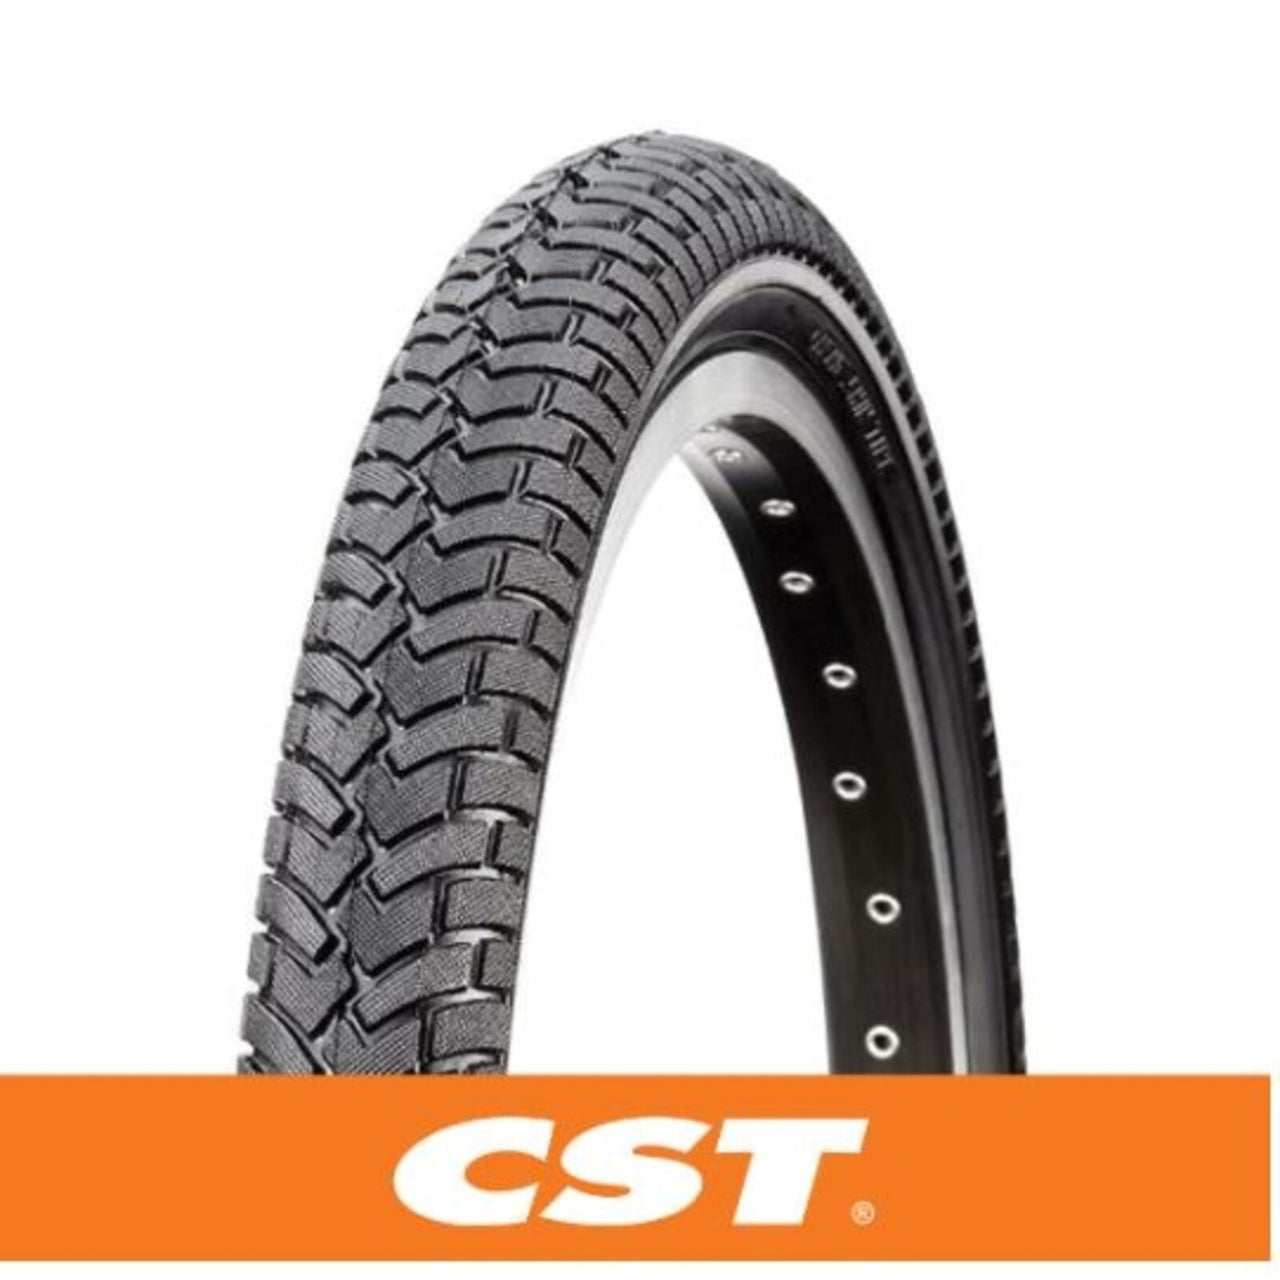 Cst Tyre Freestyle Smooth 18 X 1.95 Wire Bead Tyre